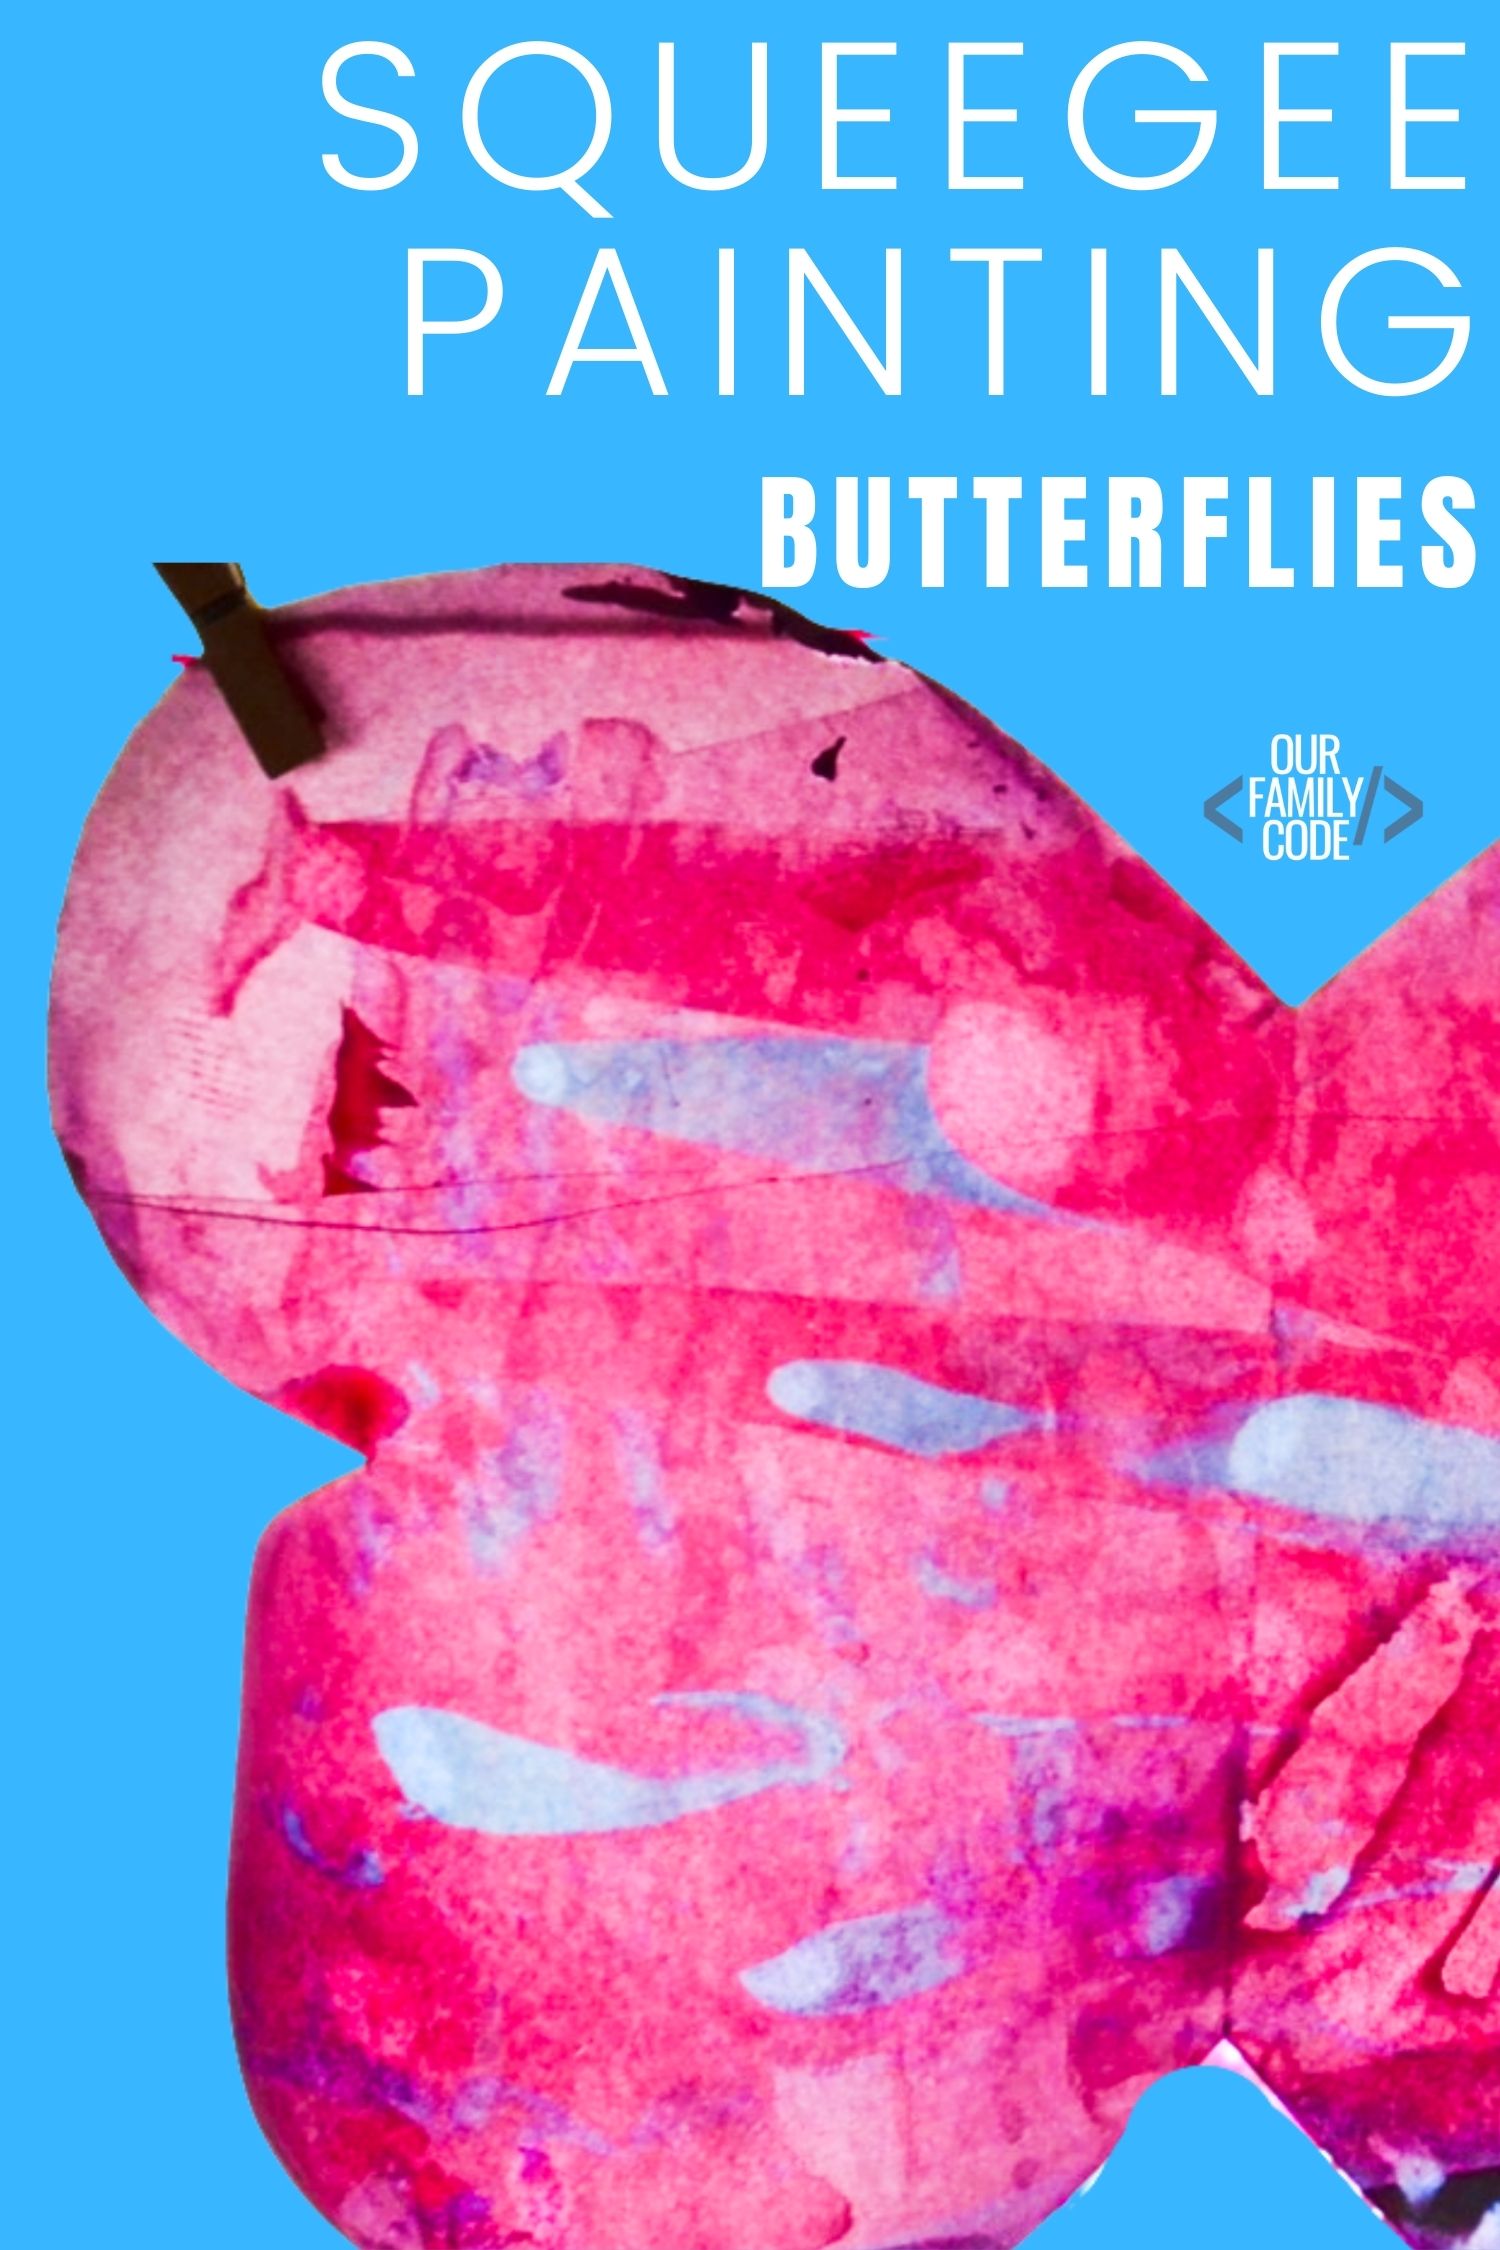 A picture of a pink squeegee art butterfly on a blue background.